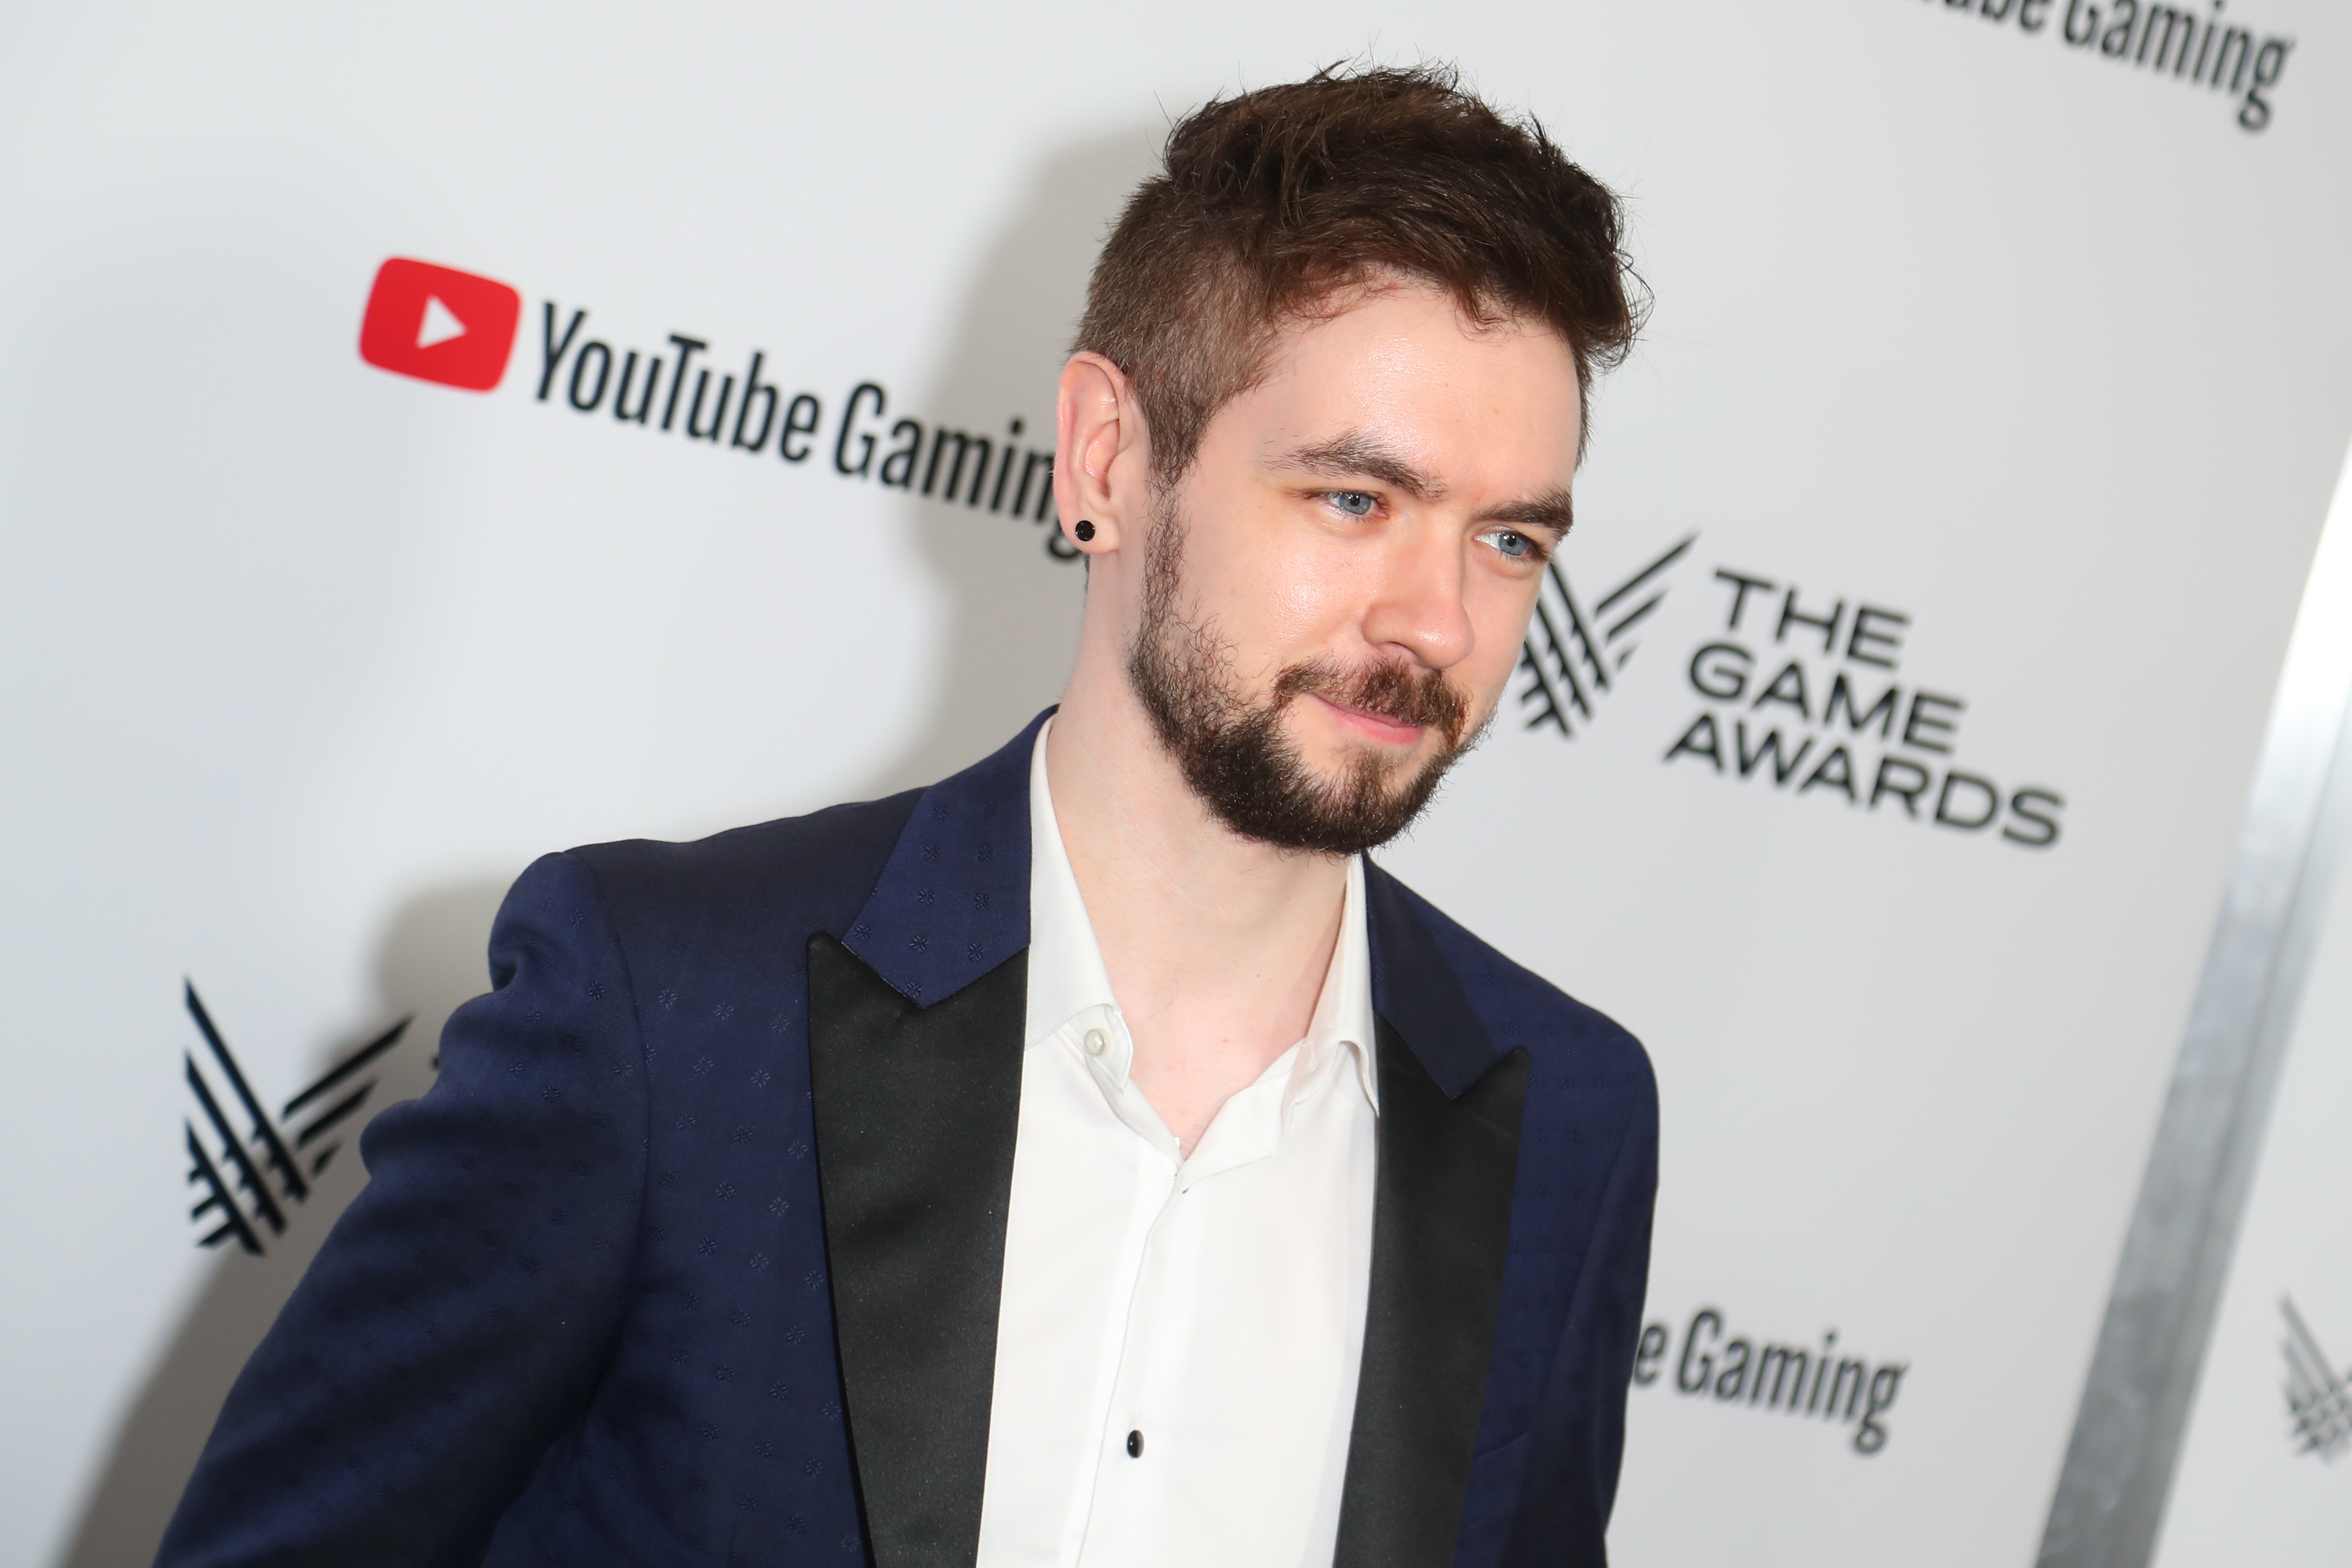 Jacksepticeye is taking a break for a ‘little longer,’ but has plans to return